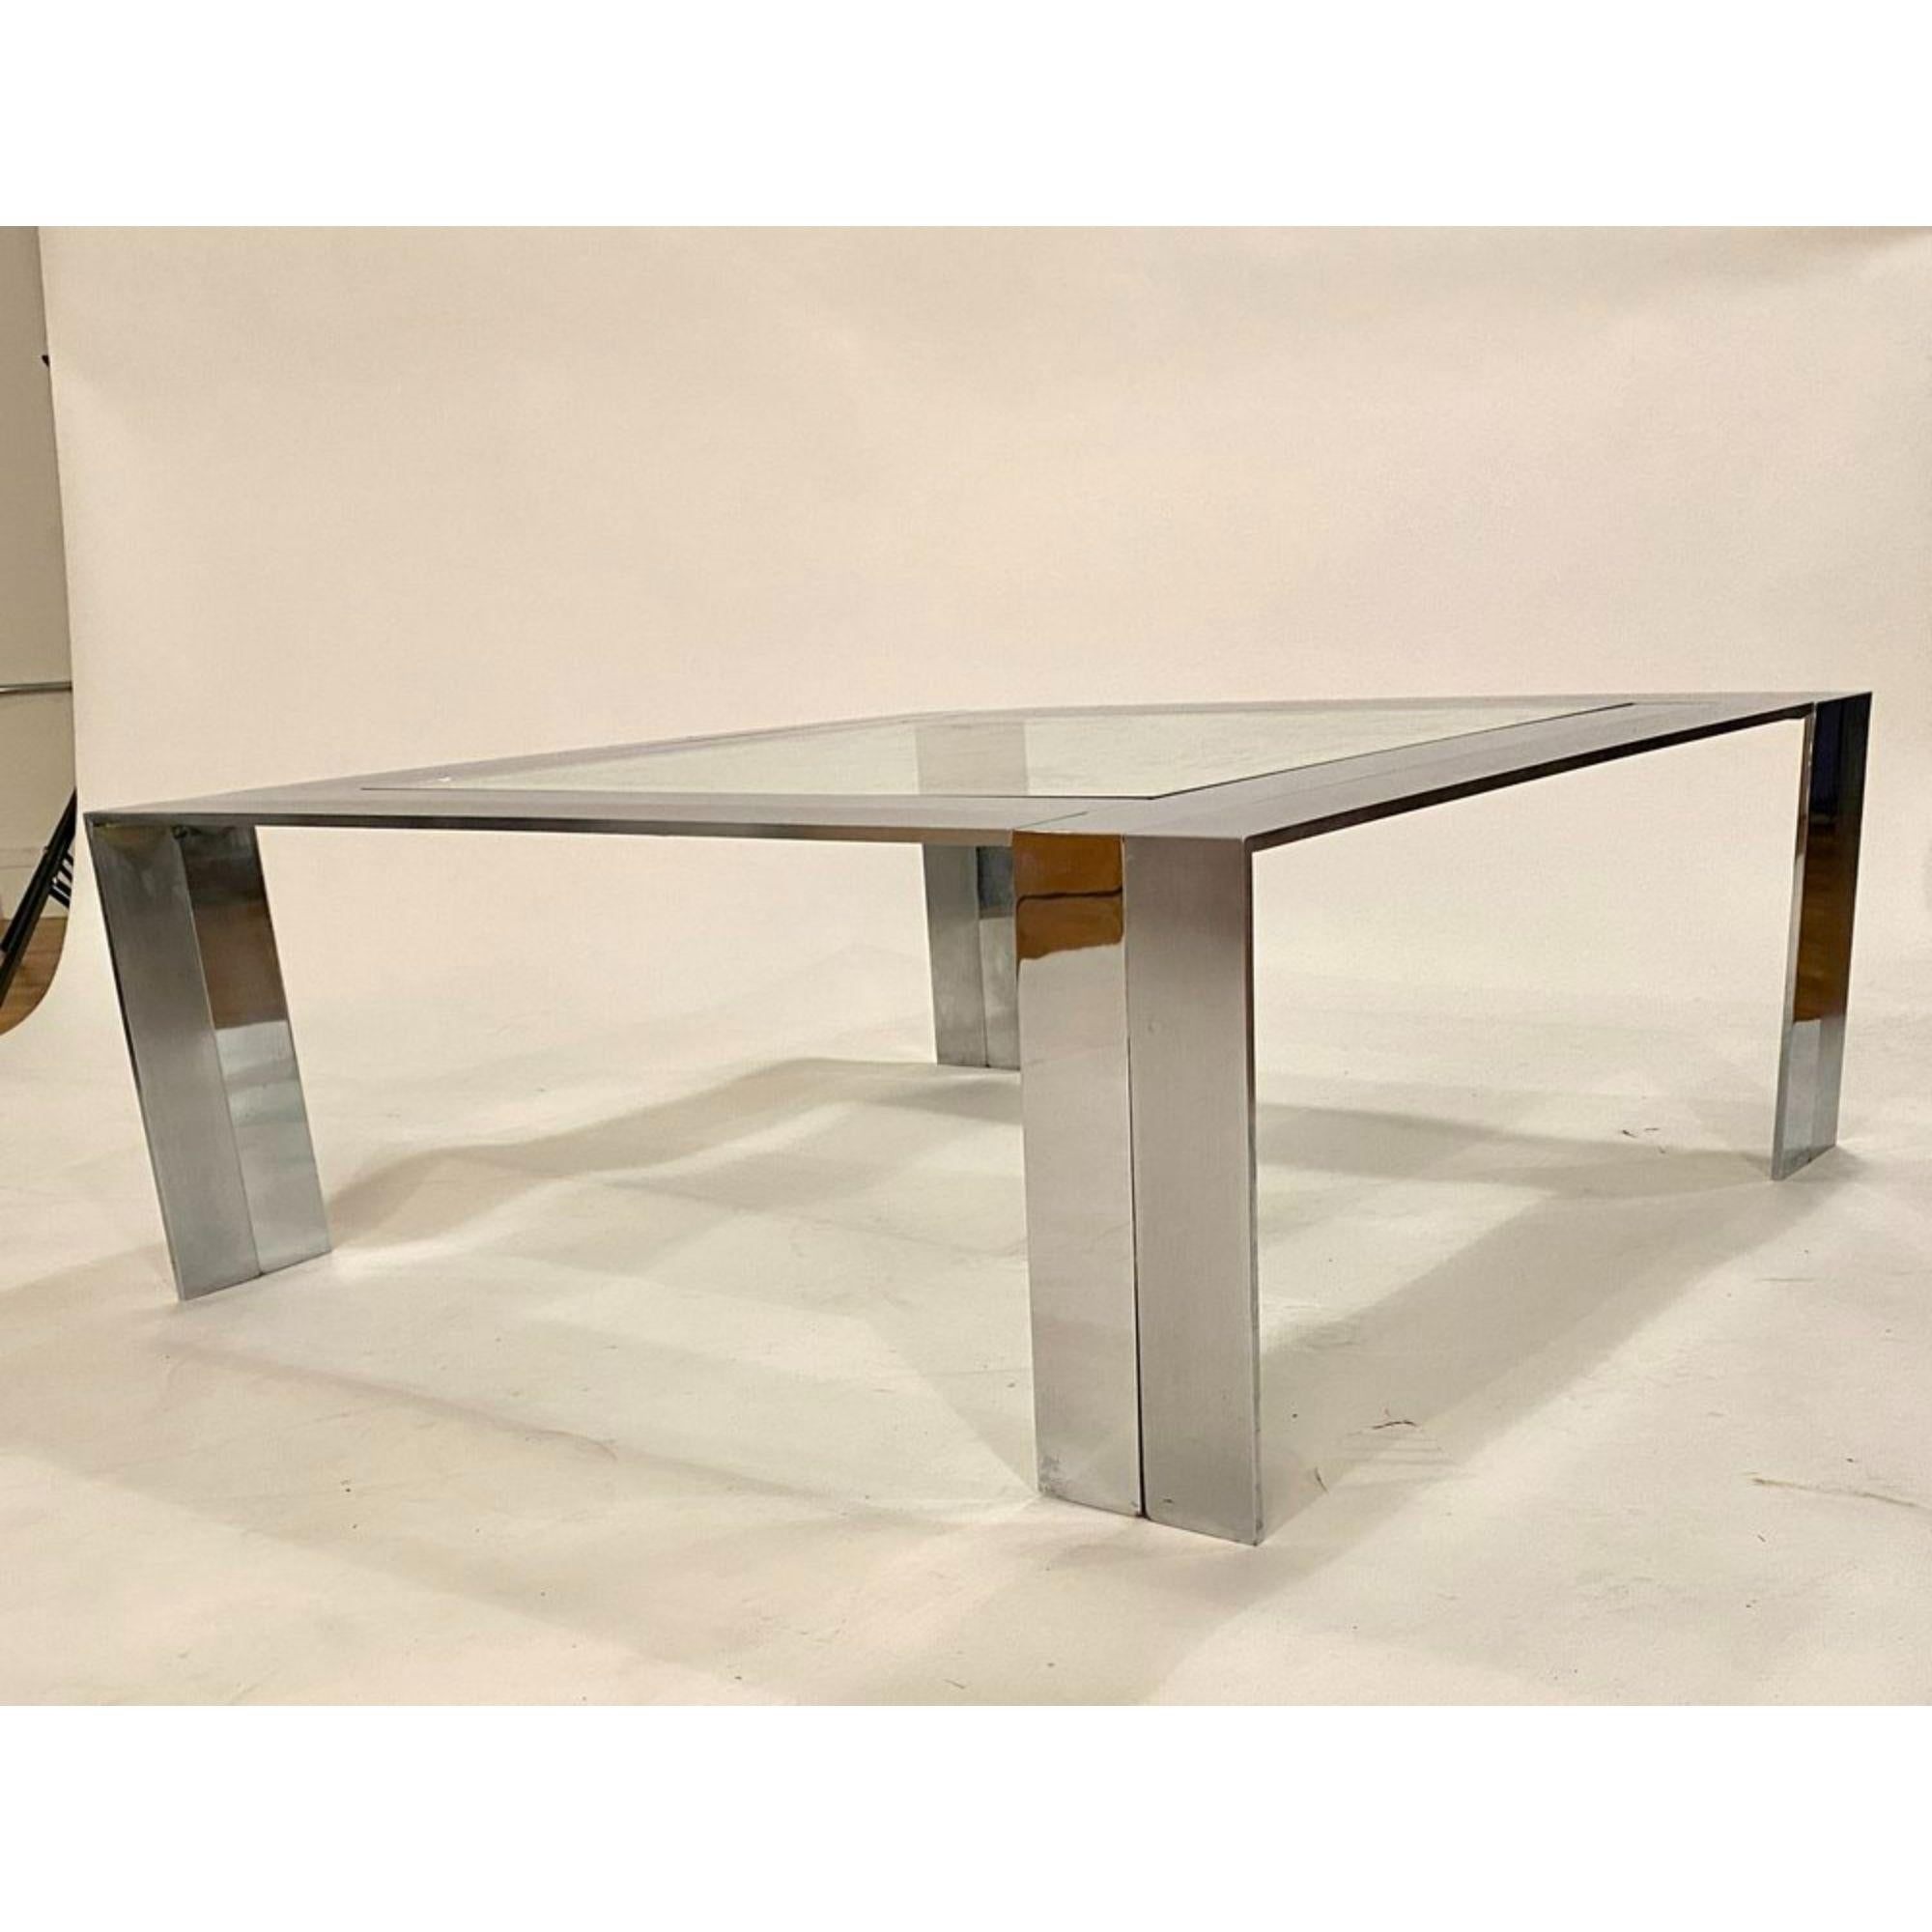 American Postmodern Steel and Glass Cocktail Table by Elaine Cohen For Sale